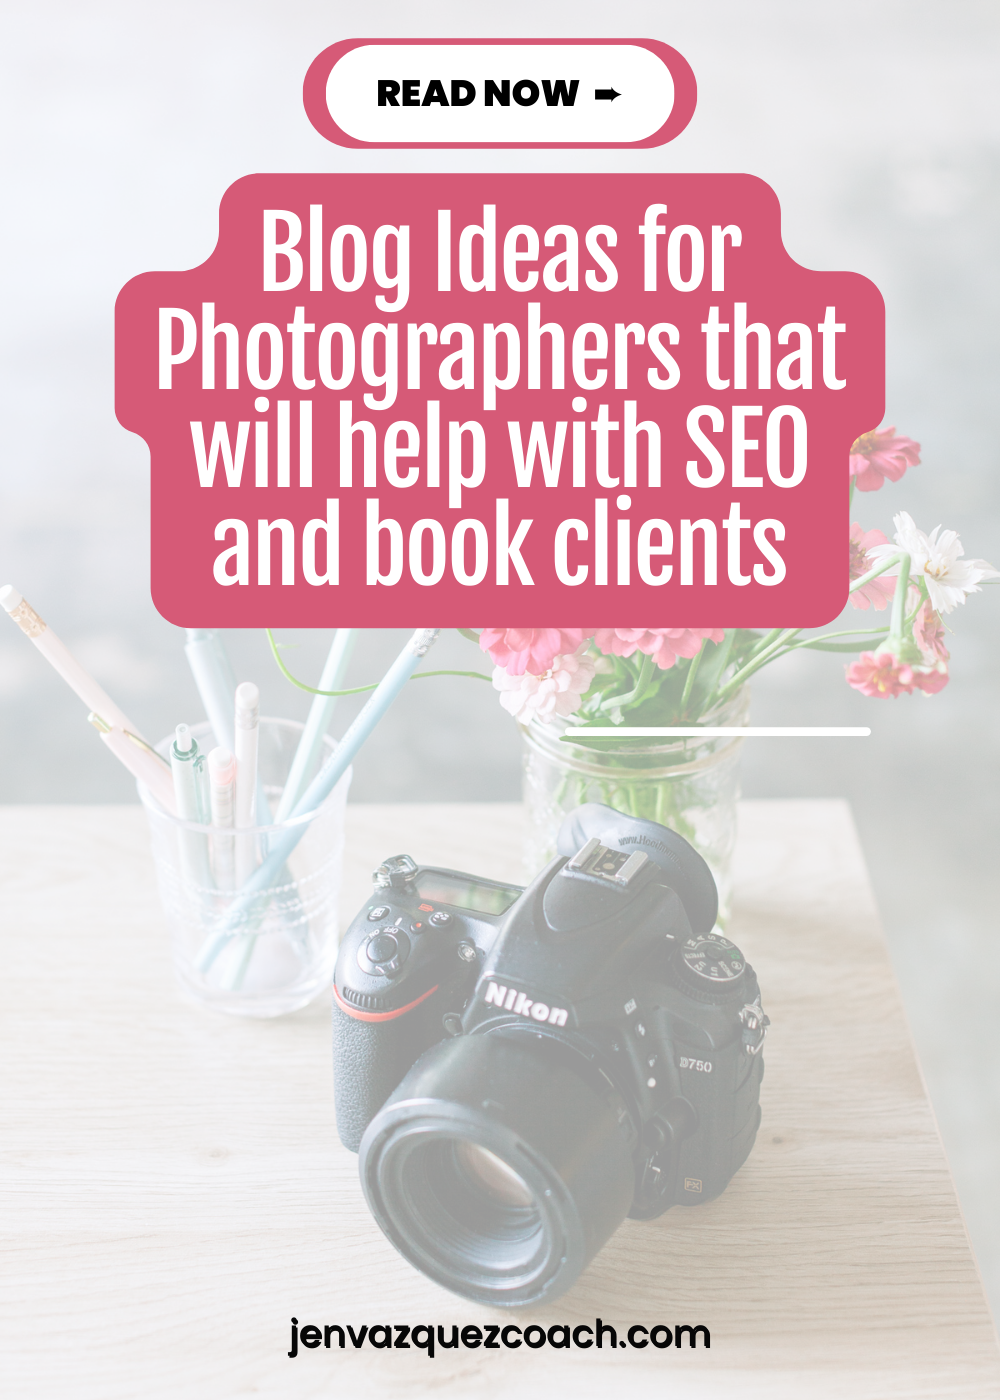 Blog Ideas for Photographers that will help with SEO and book clients<br />
